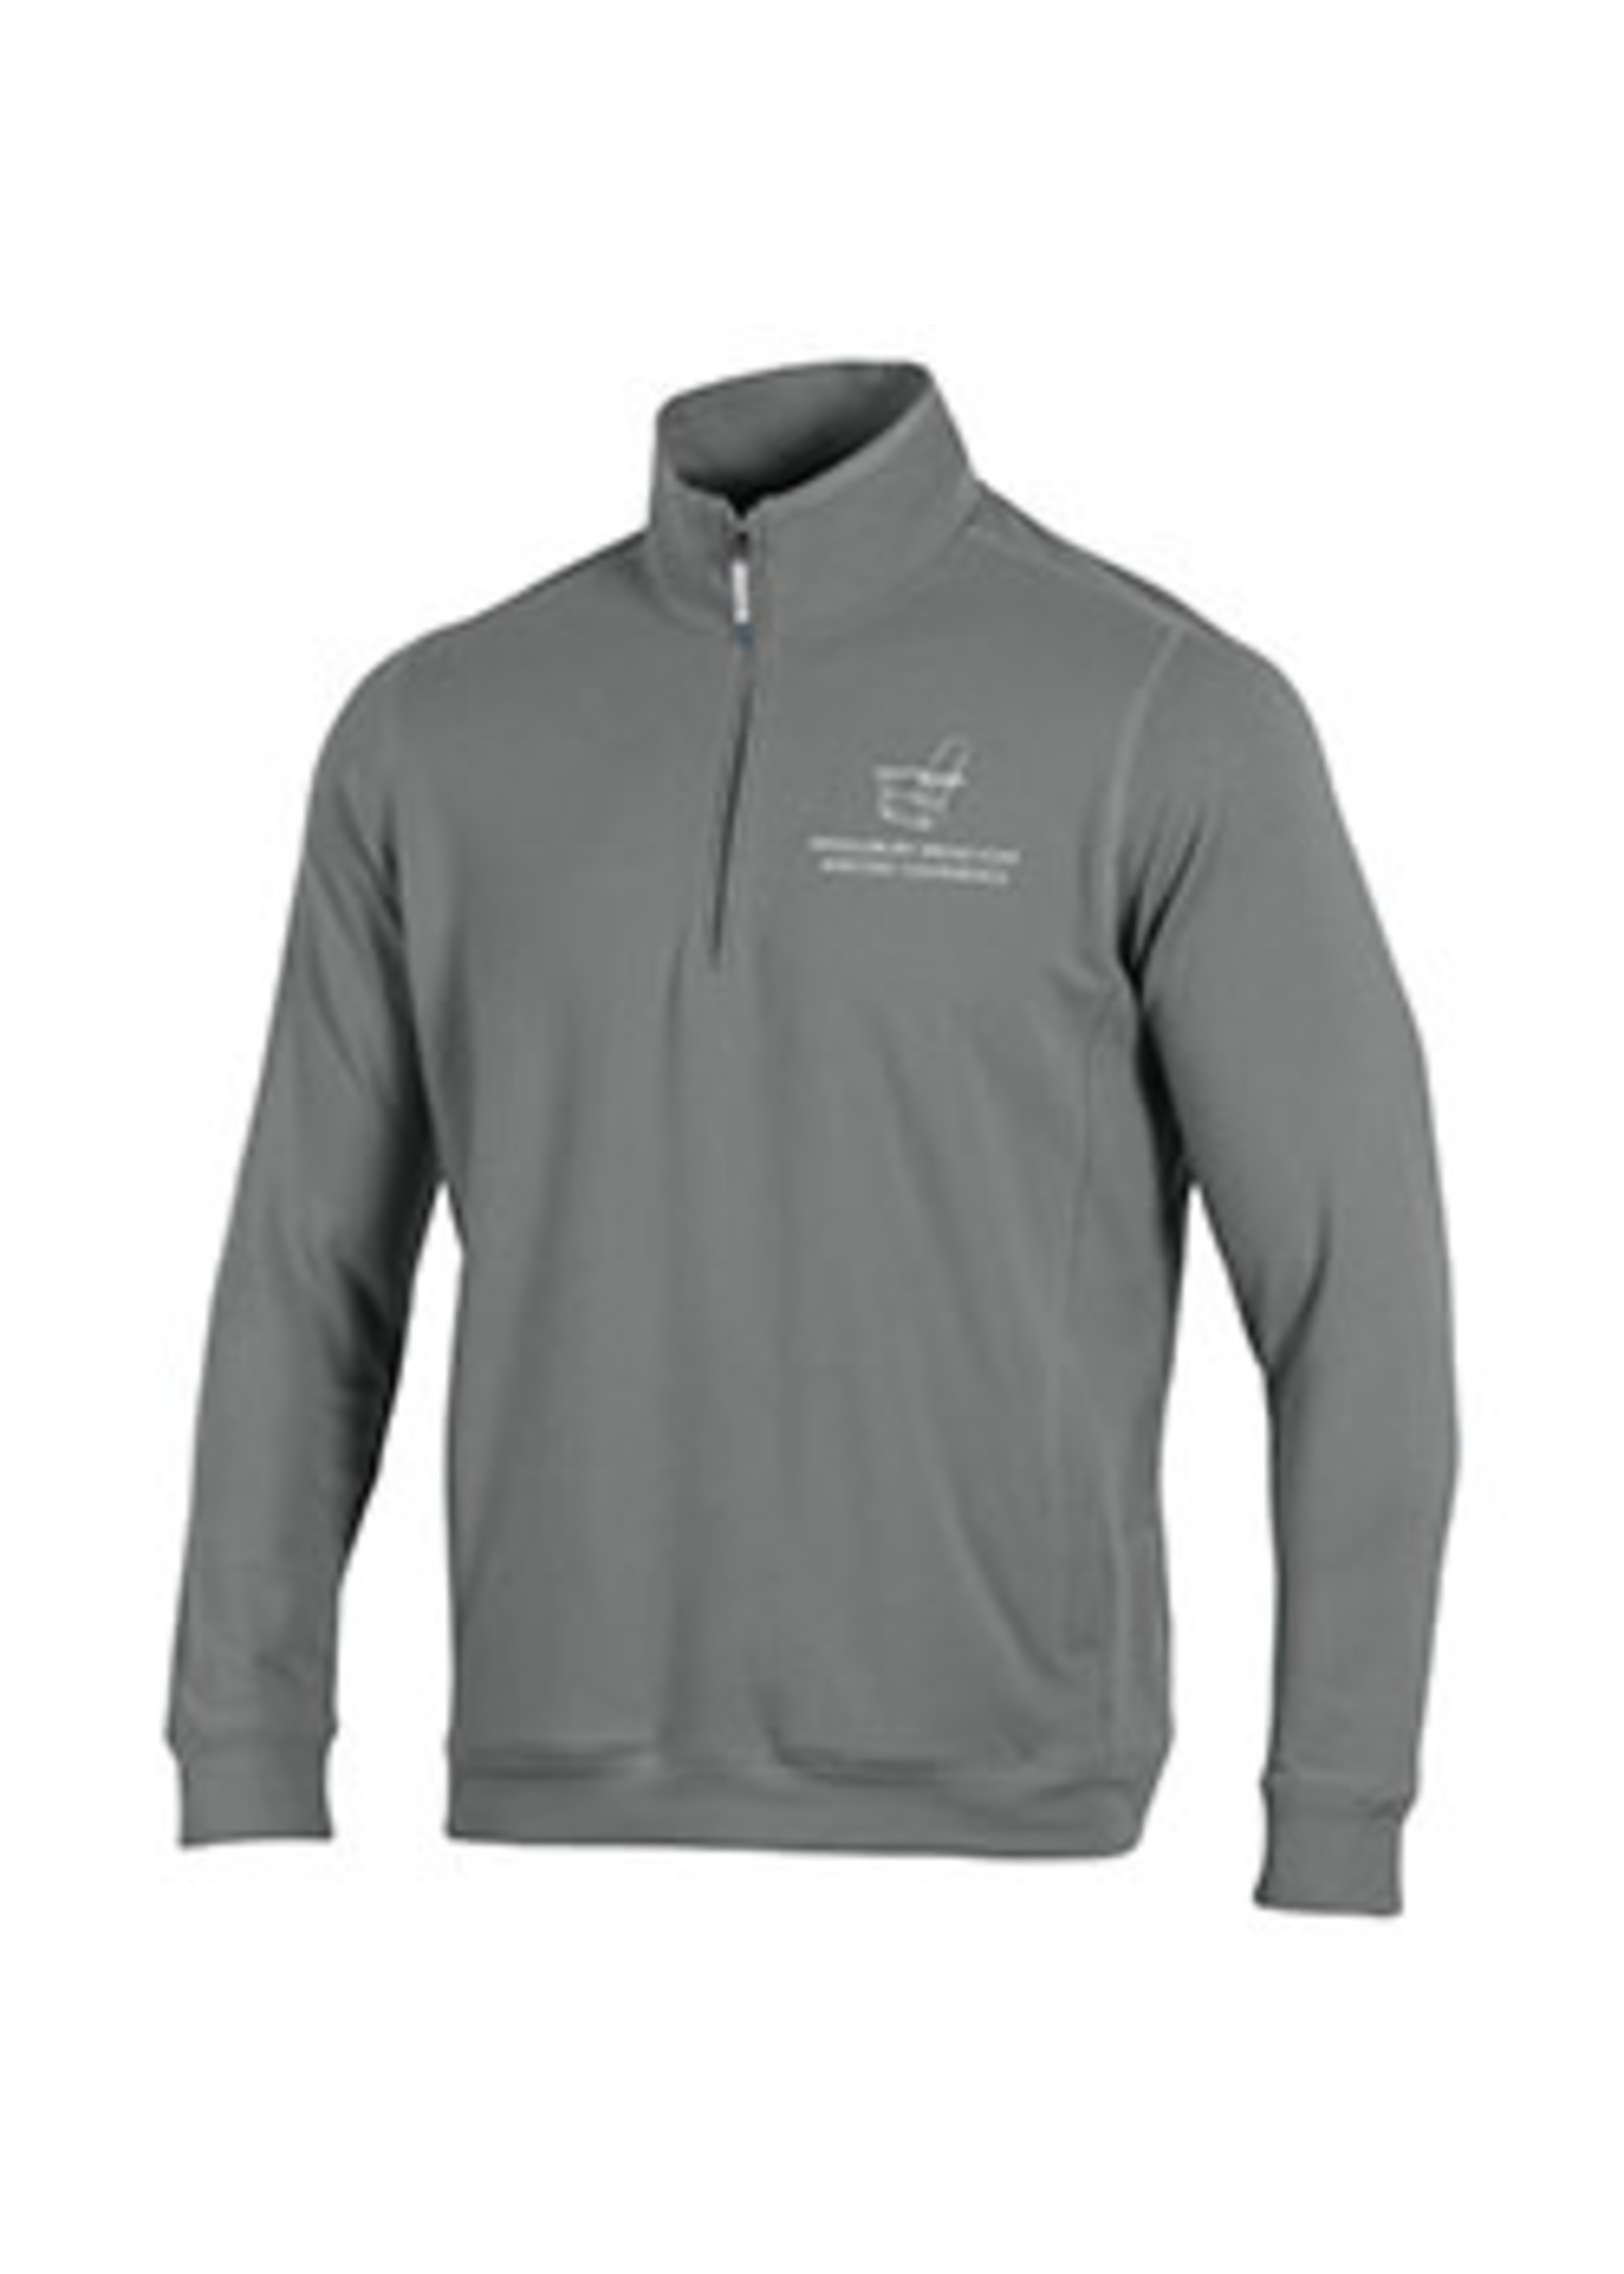 Champion BREAD LOAF WRITER'S CONFERENCE 1/4 ZIP